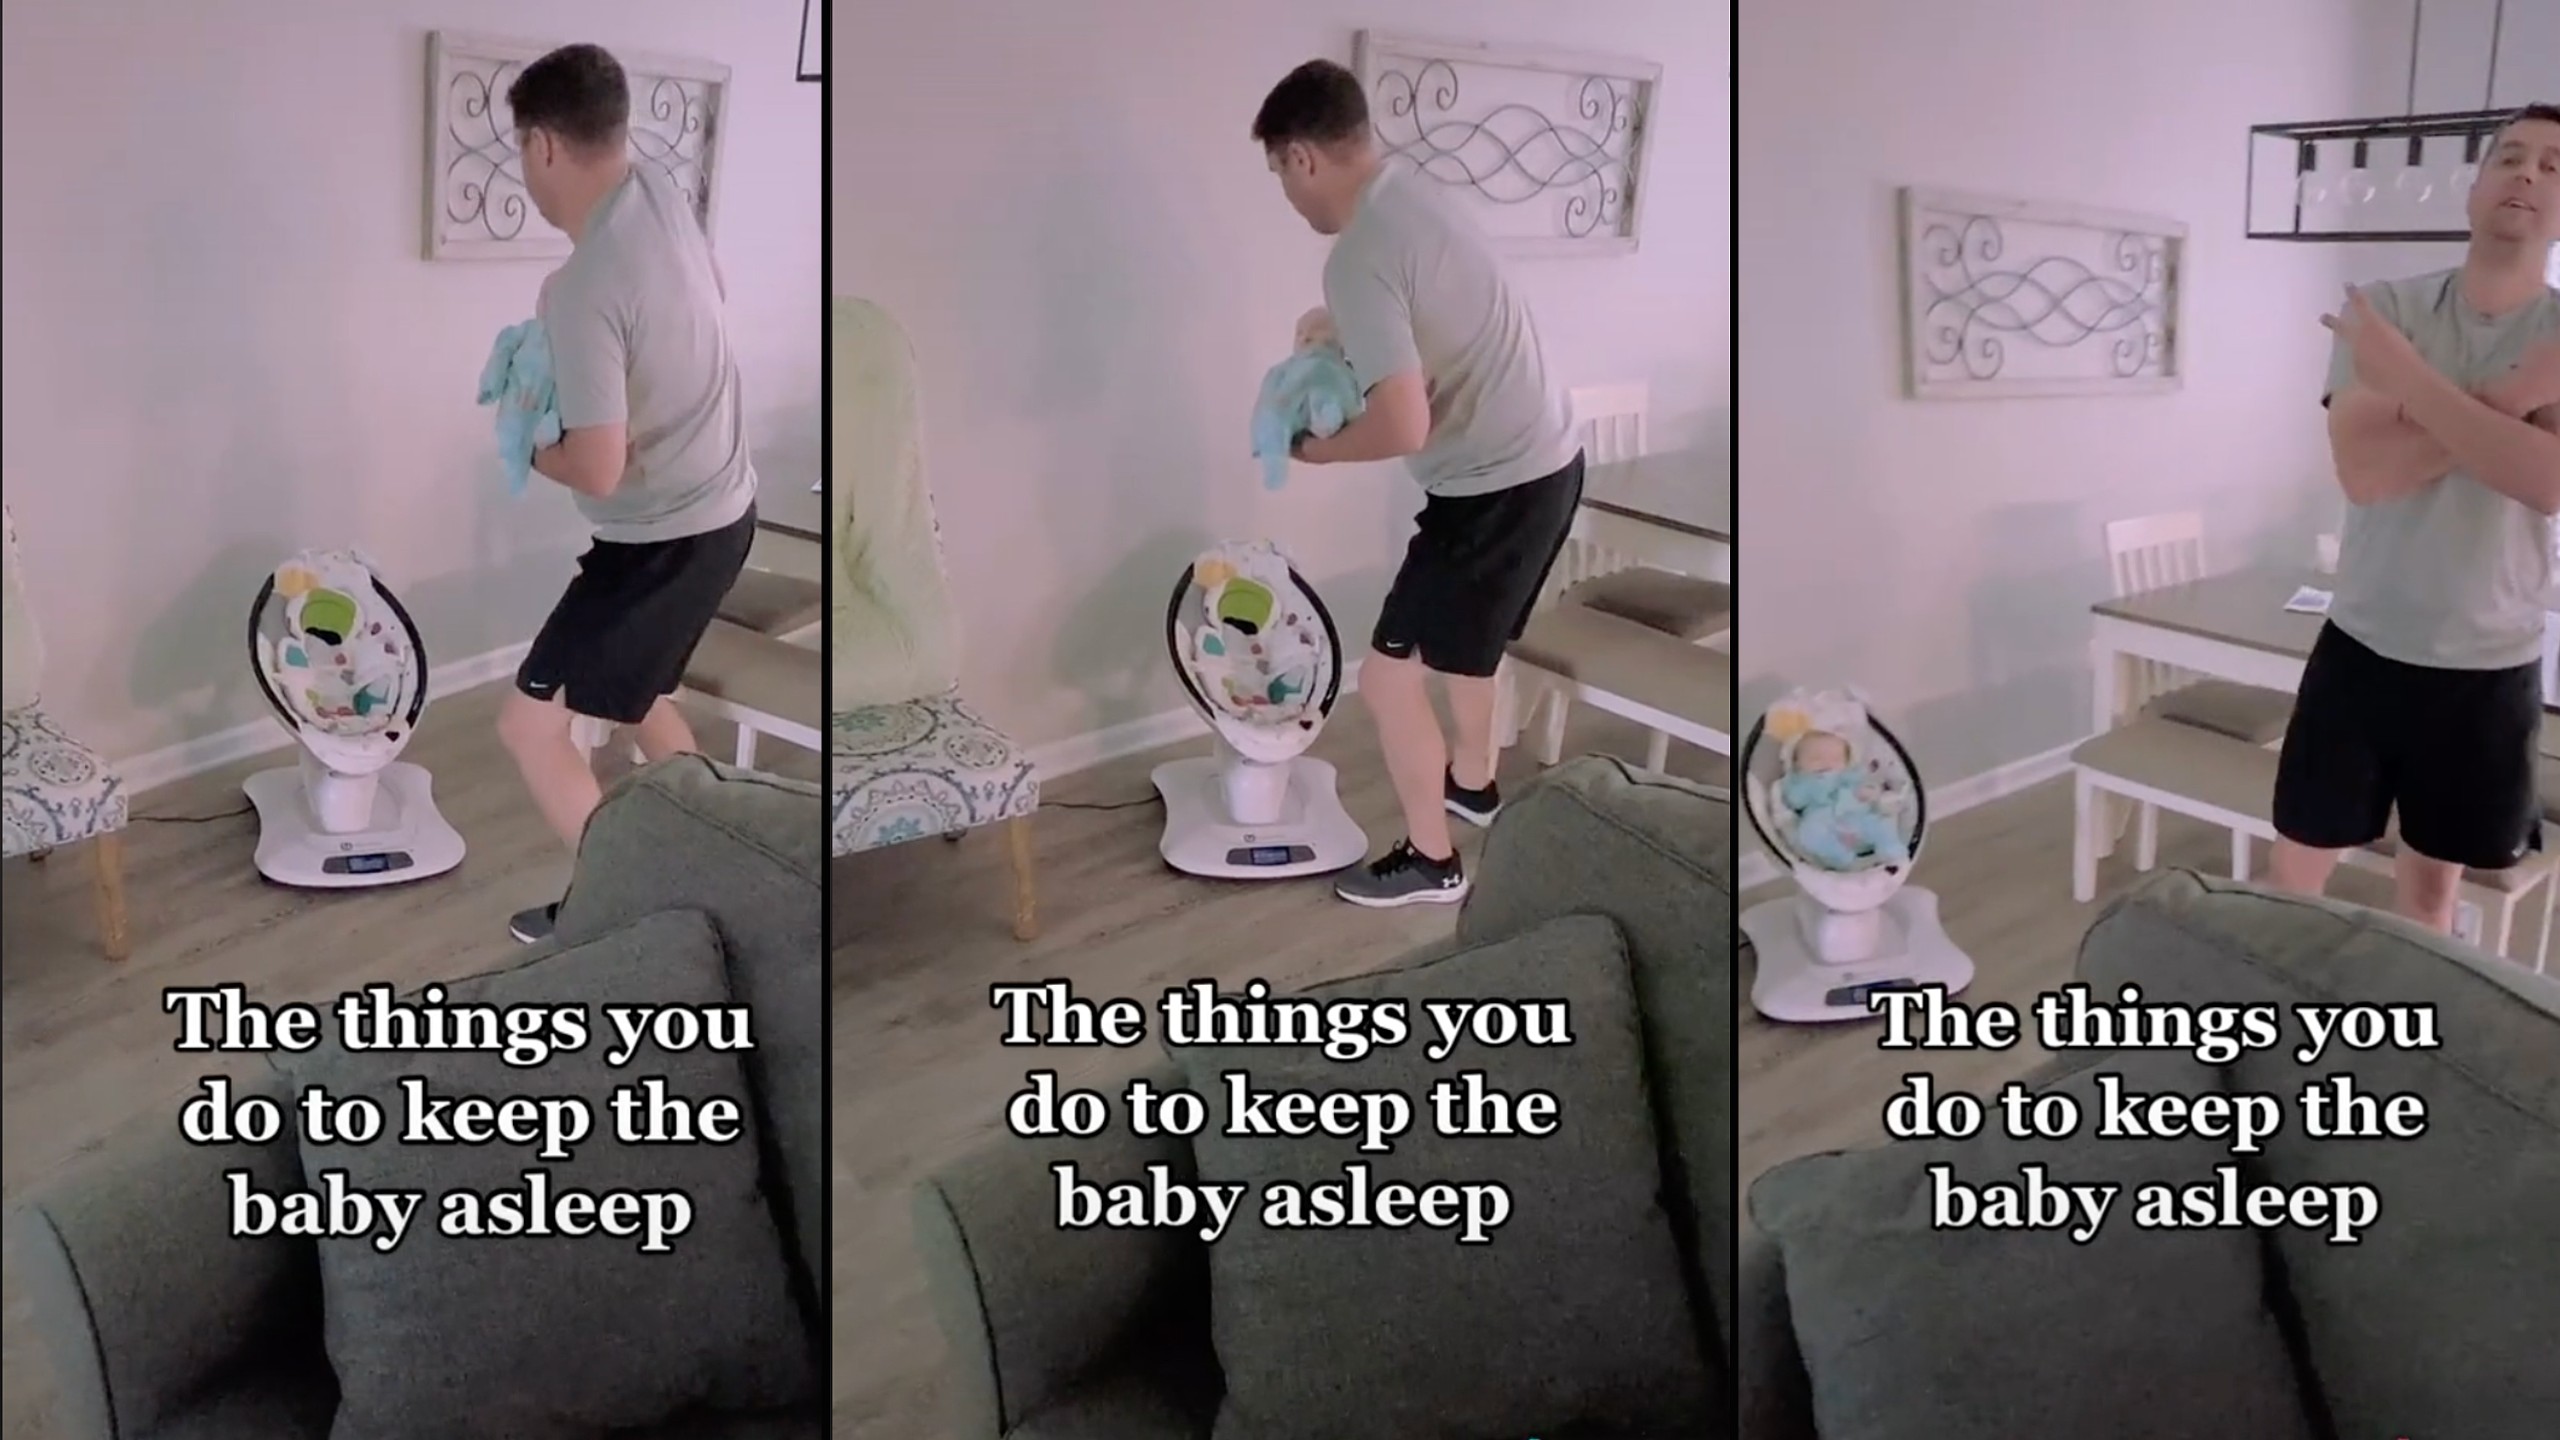 Dad expertly transitions sleeping baby to electric rocker by mirroring its movement